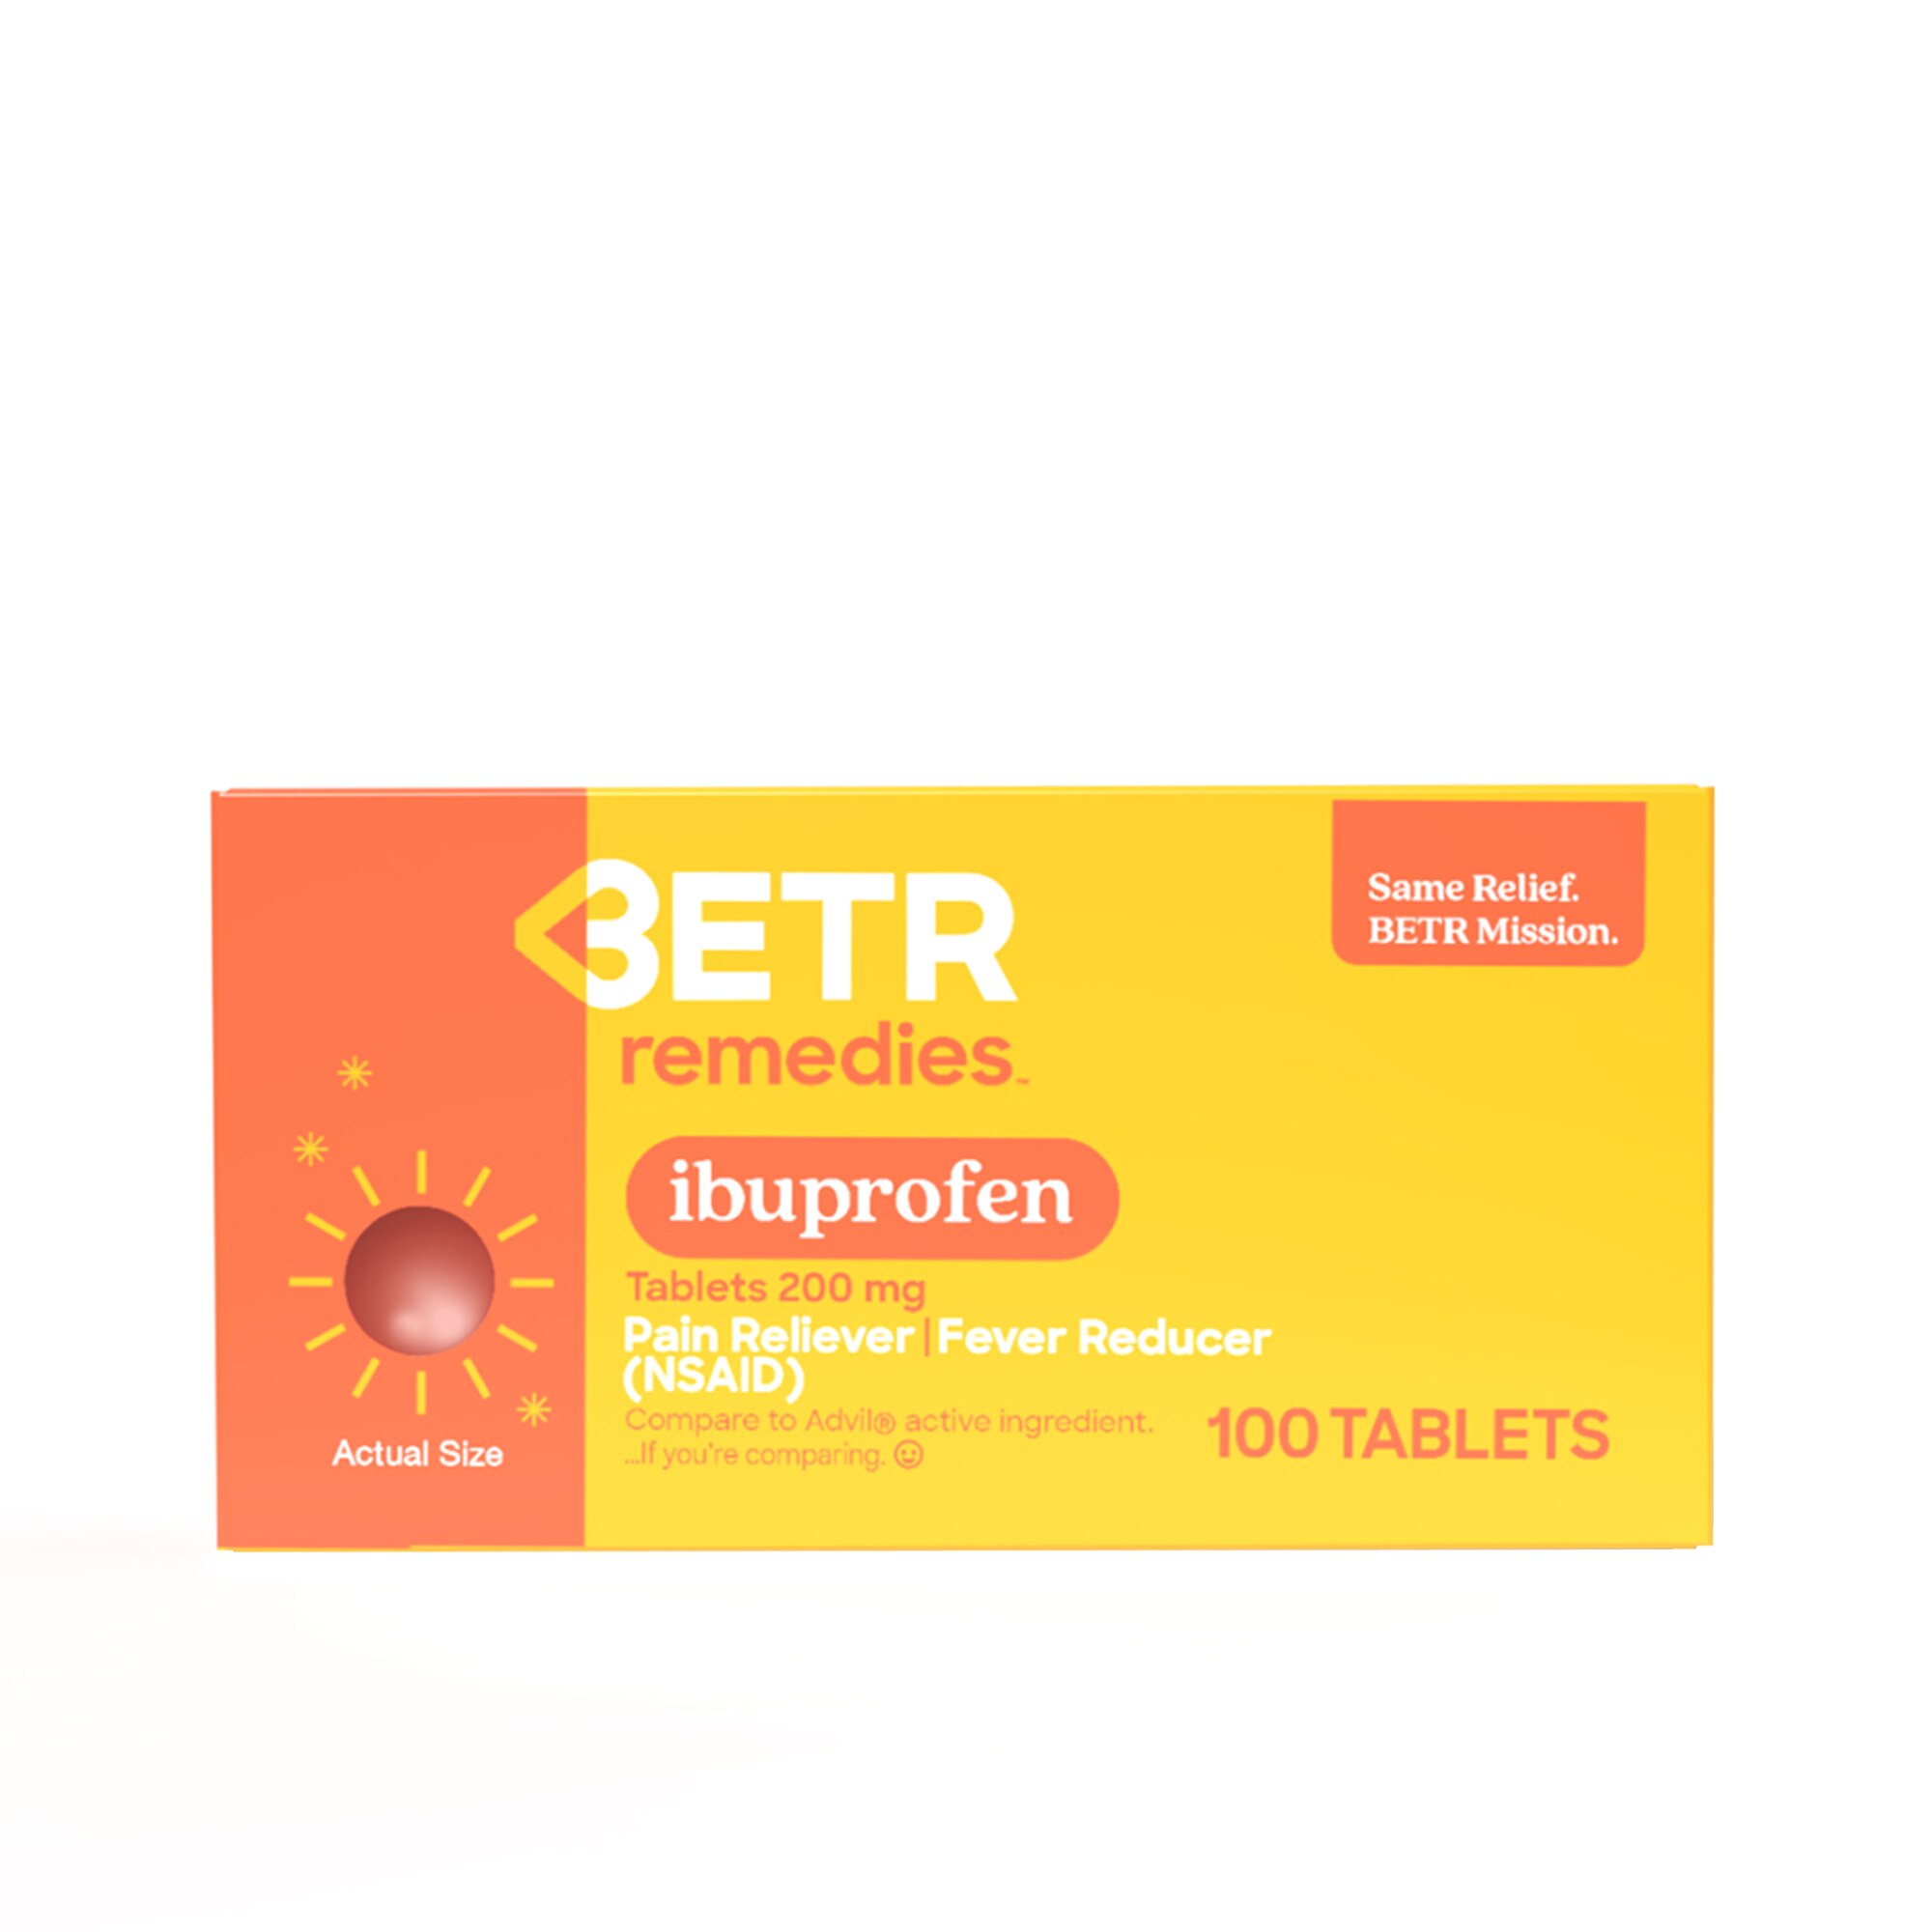 BETR Remedies Pain Relief, Ibuprofen 200mg, Anti-Inflammatory, Pain Relief & Fever Reducer, 100 Tablets